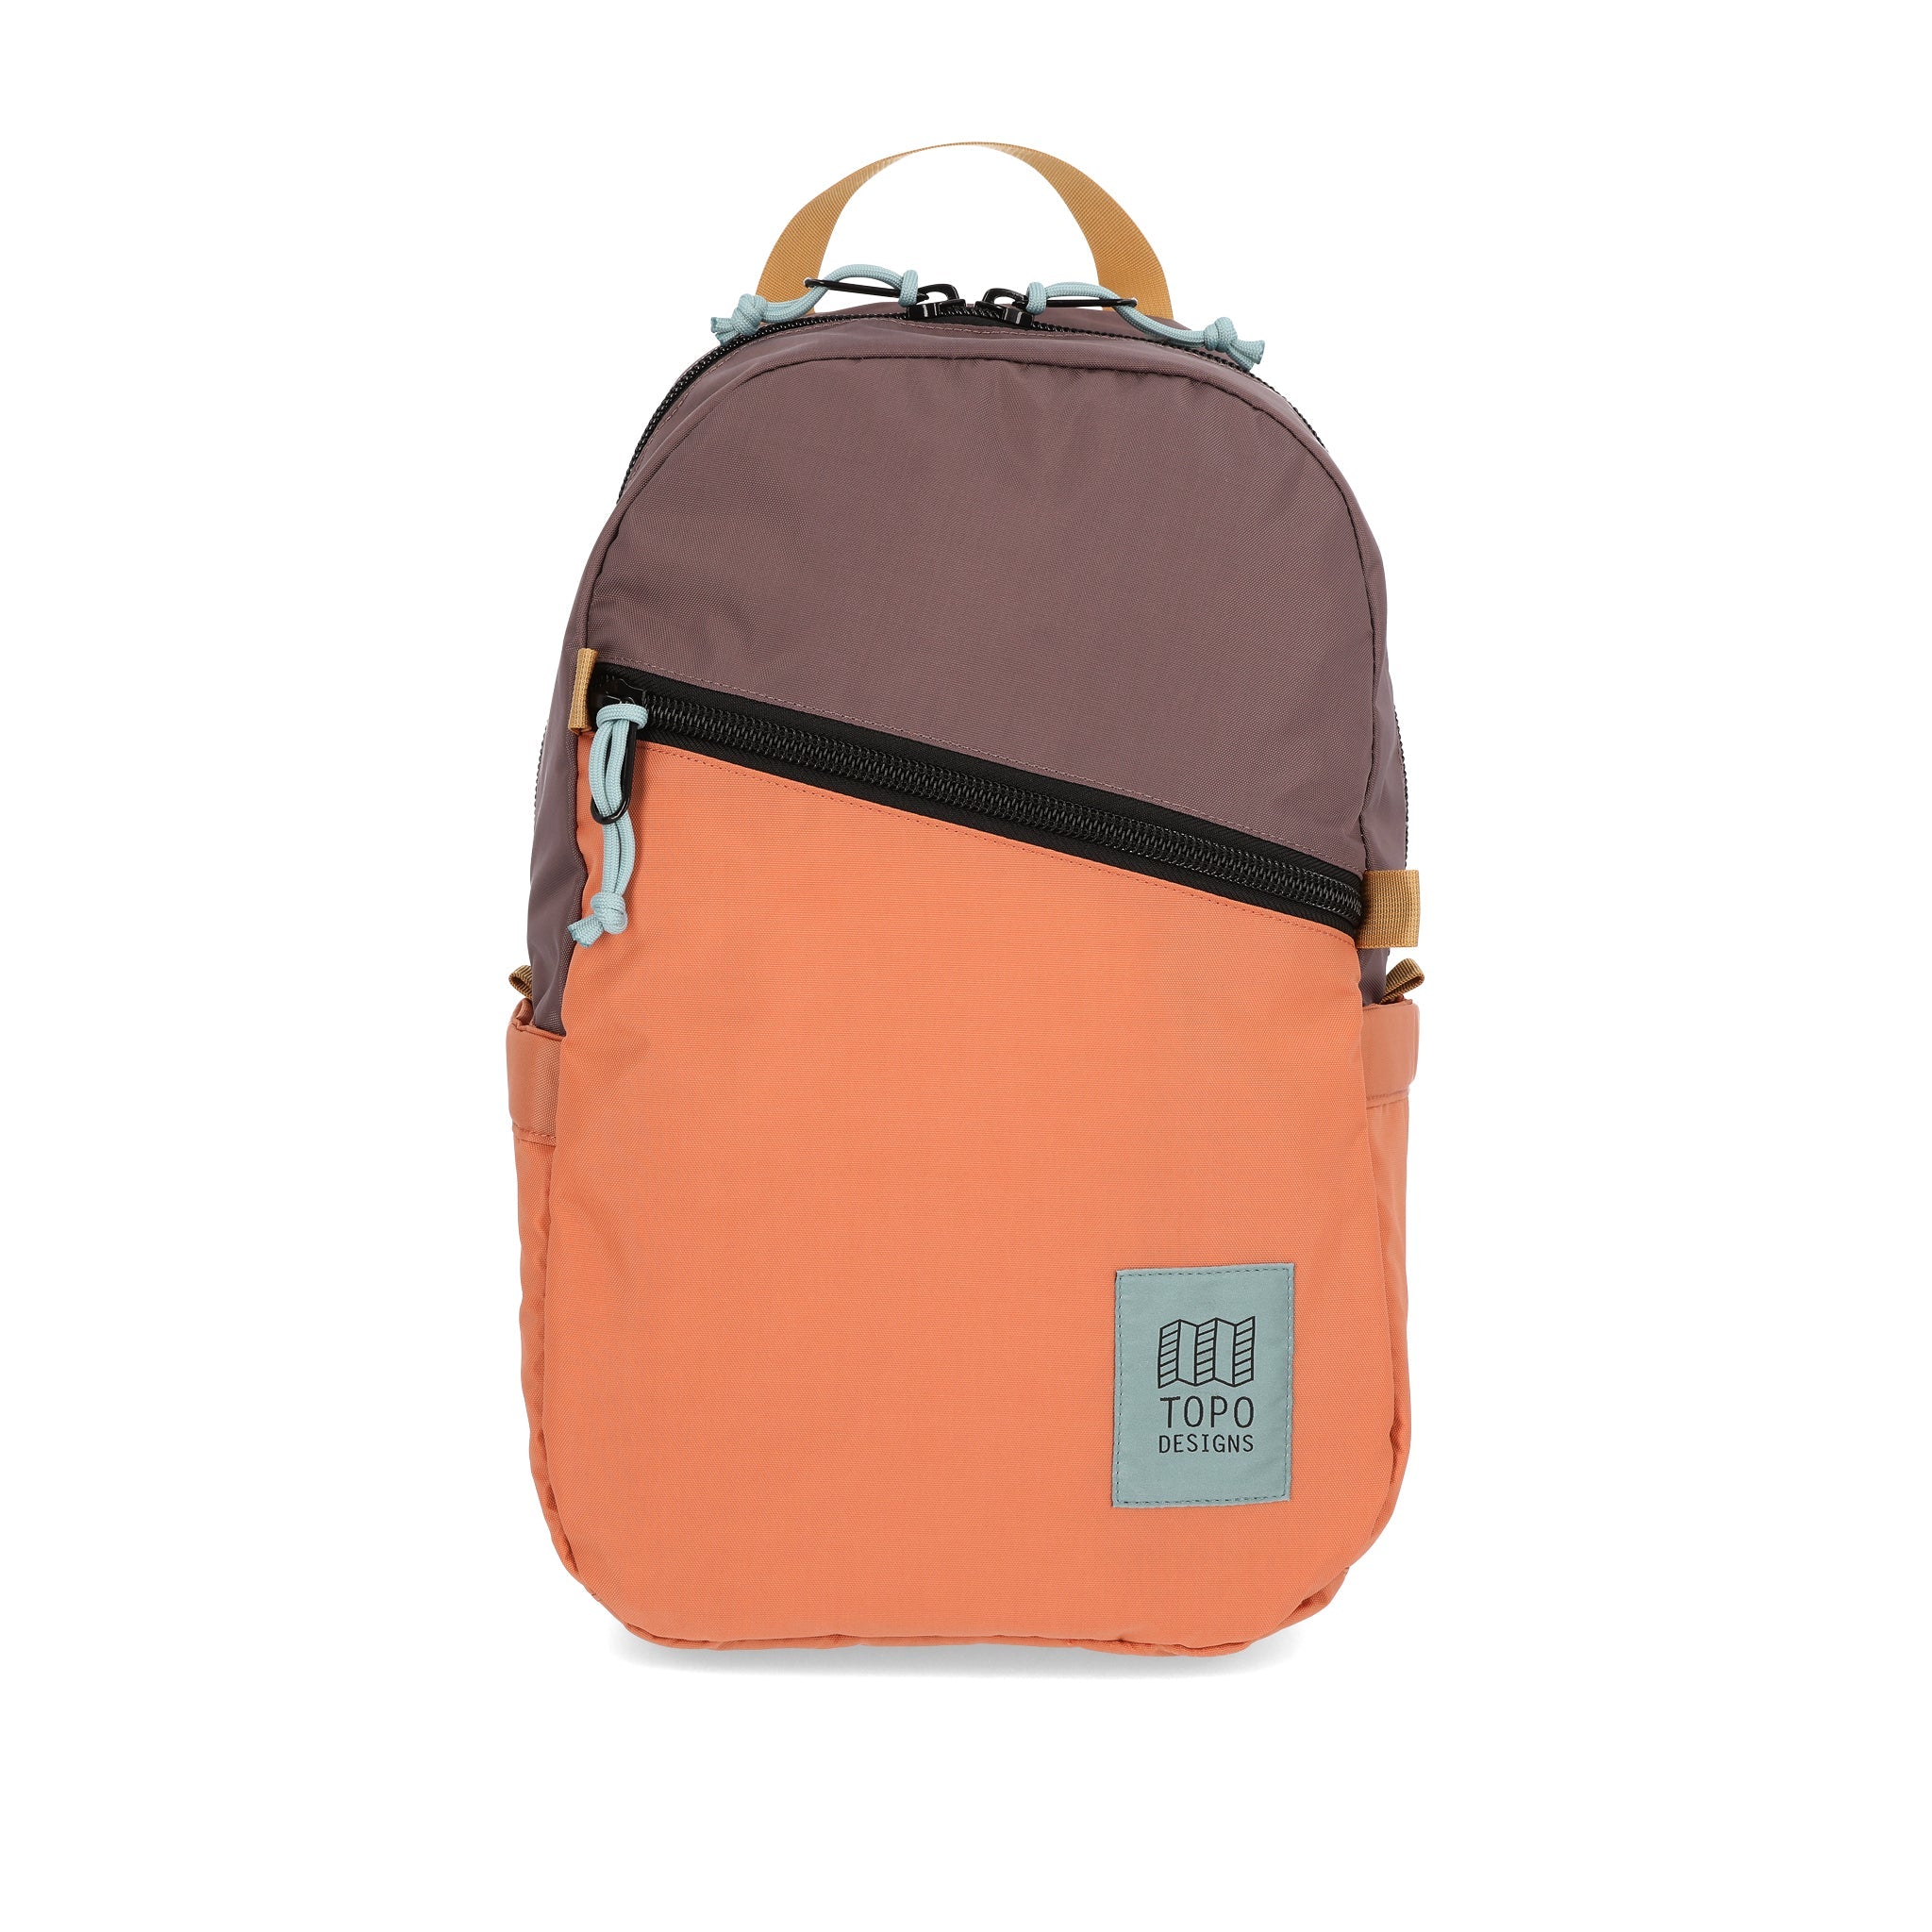 Topo Designs Light Pack in recycled "Coral / Peppercorn" nylon